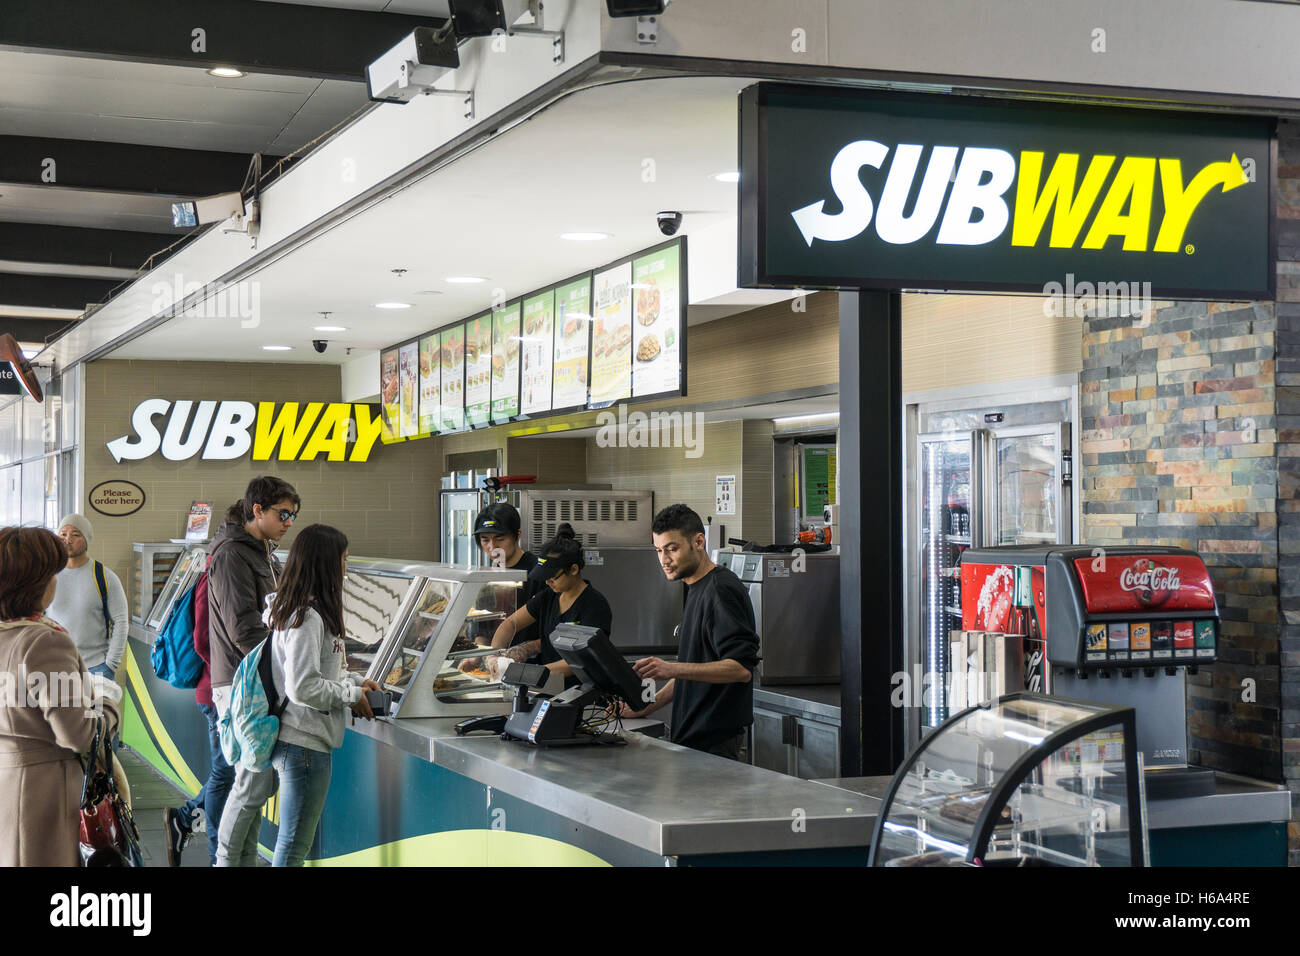 A Subway outlet in Sydney, Australia Stock Photo